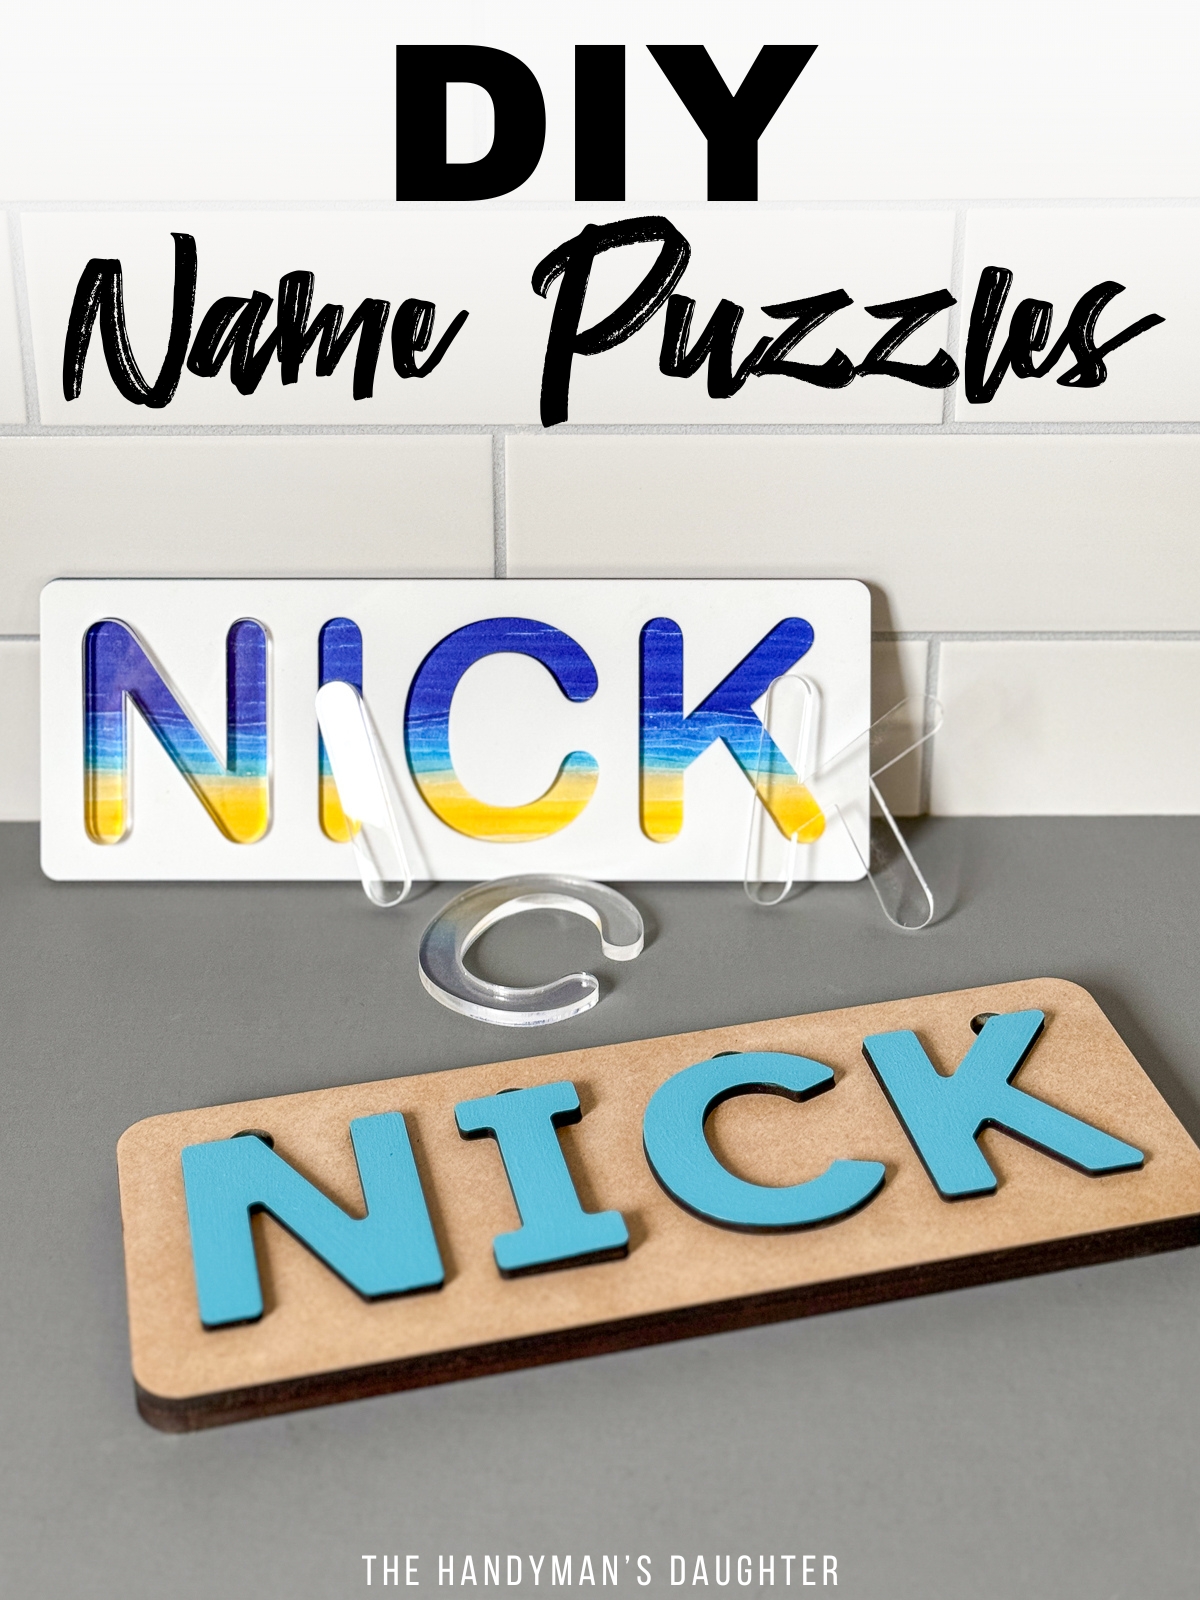 DIY Personalized Name Puzzles